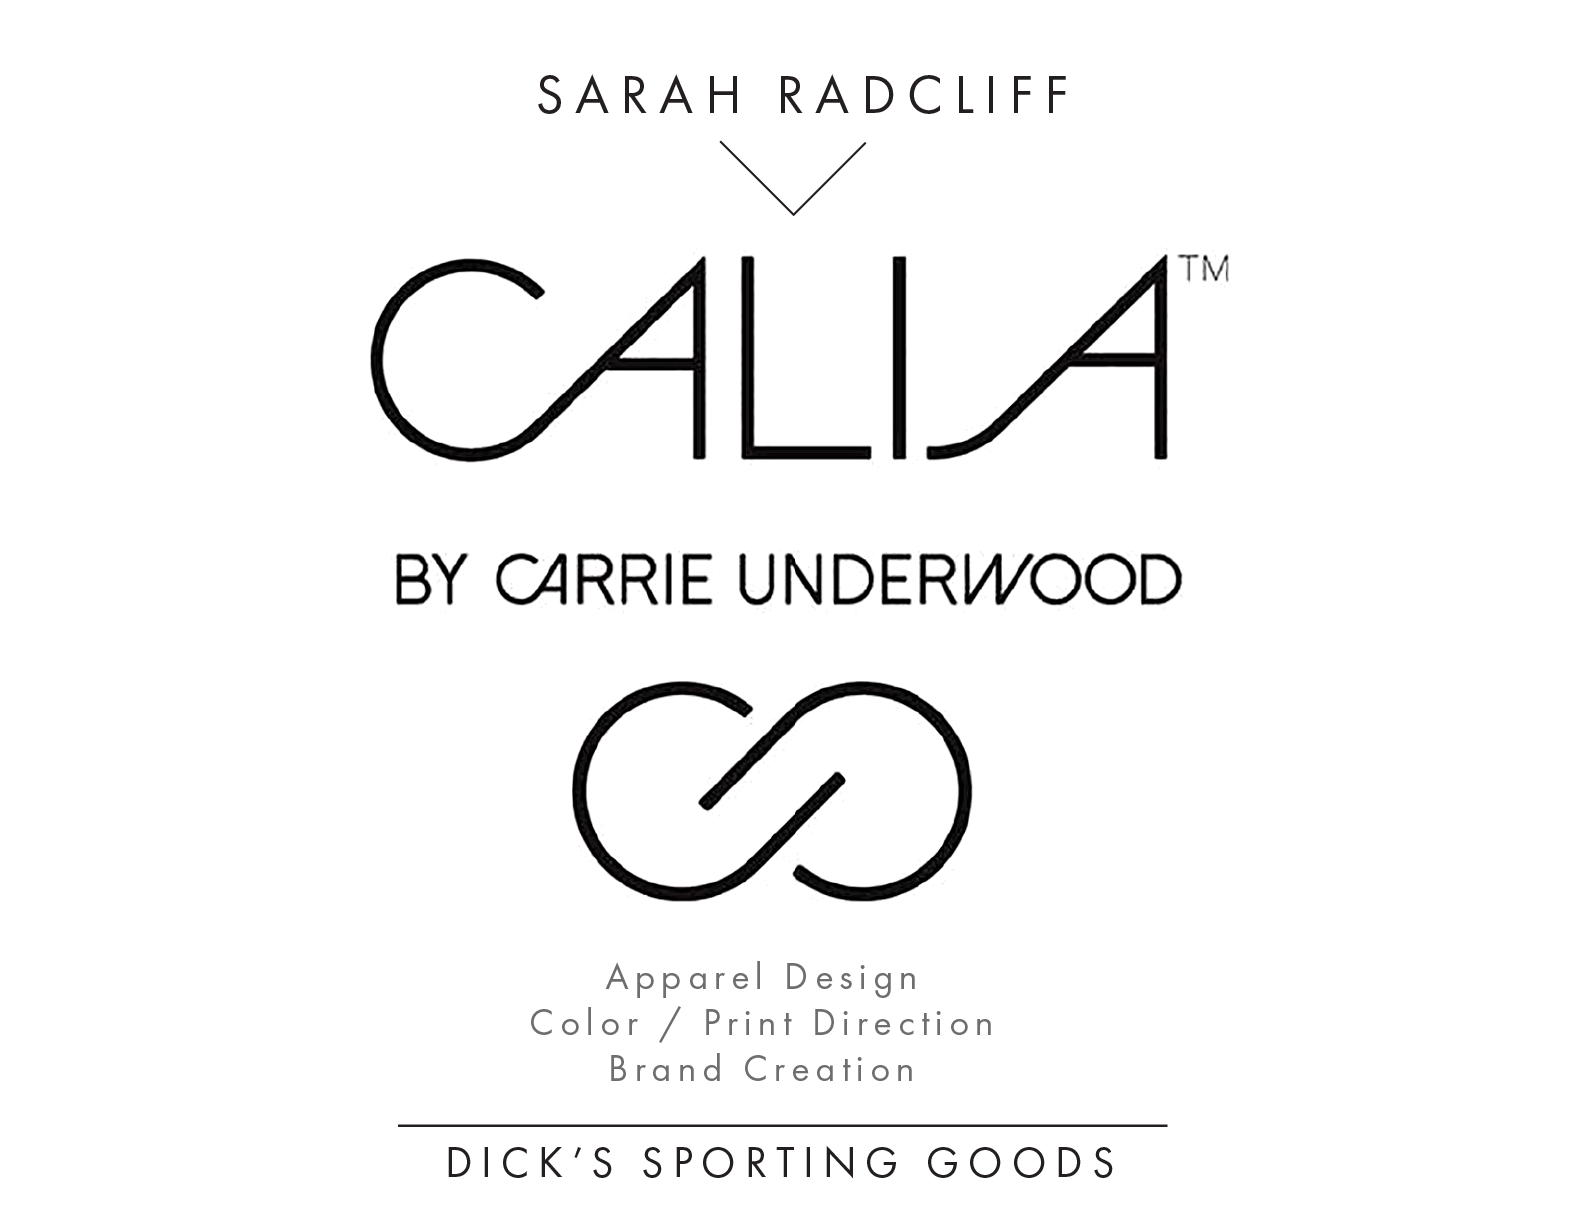 IMAGE DISTRIBUTED FOR CALIA BY CARRIE UNDERWOOD - DICK'S Sporting